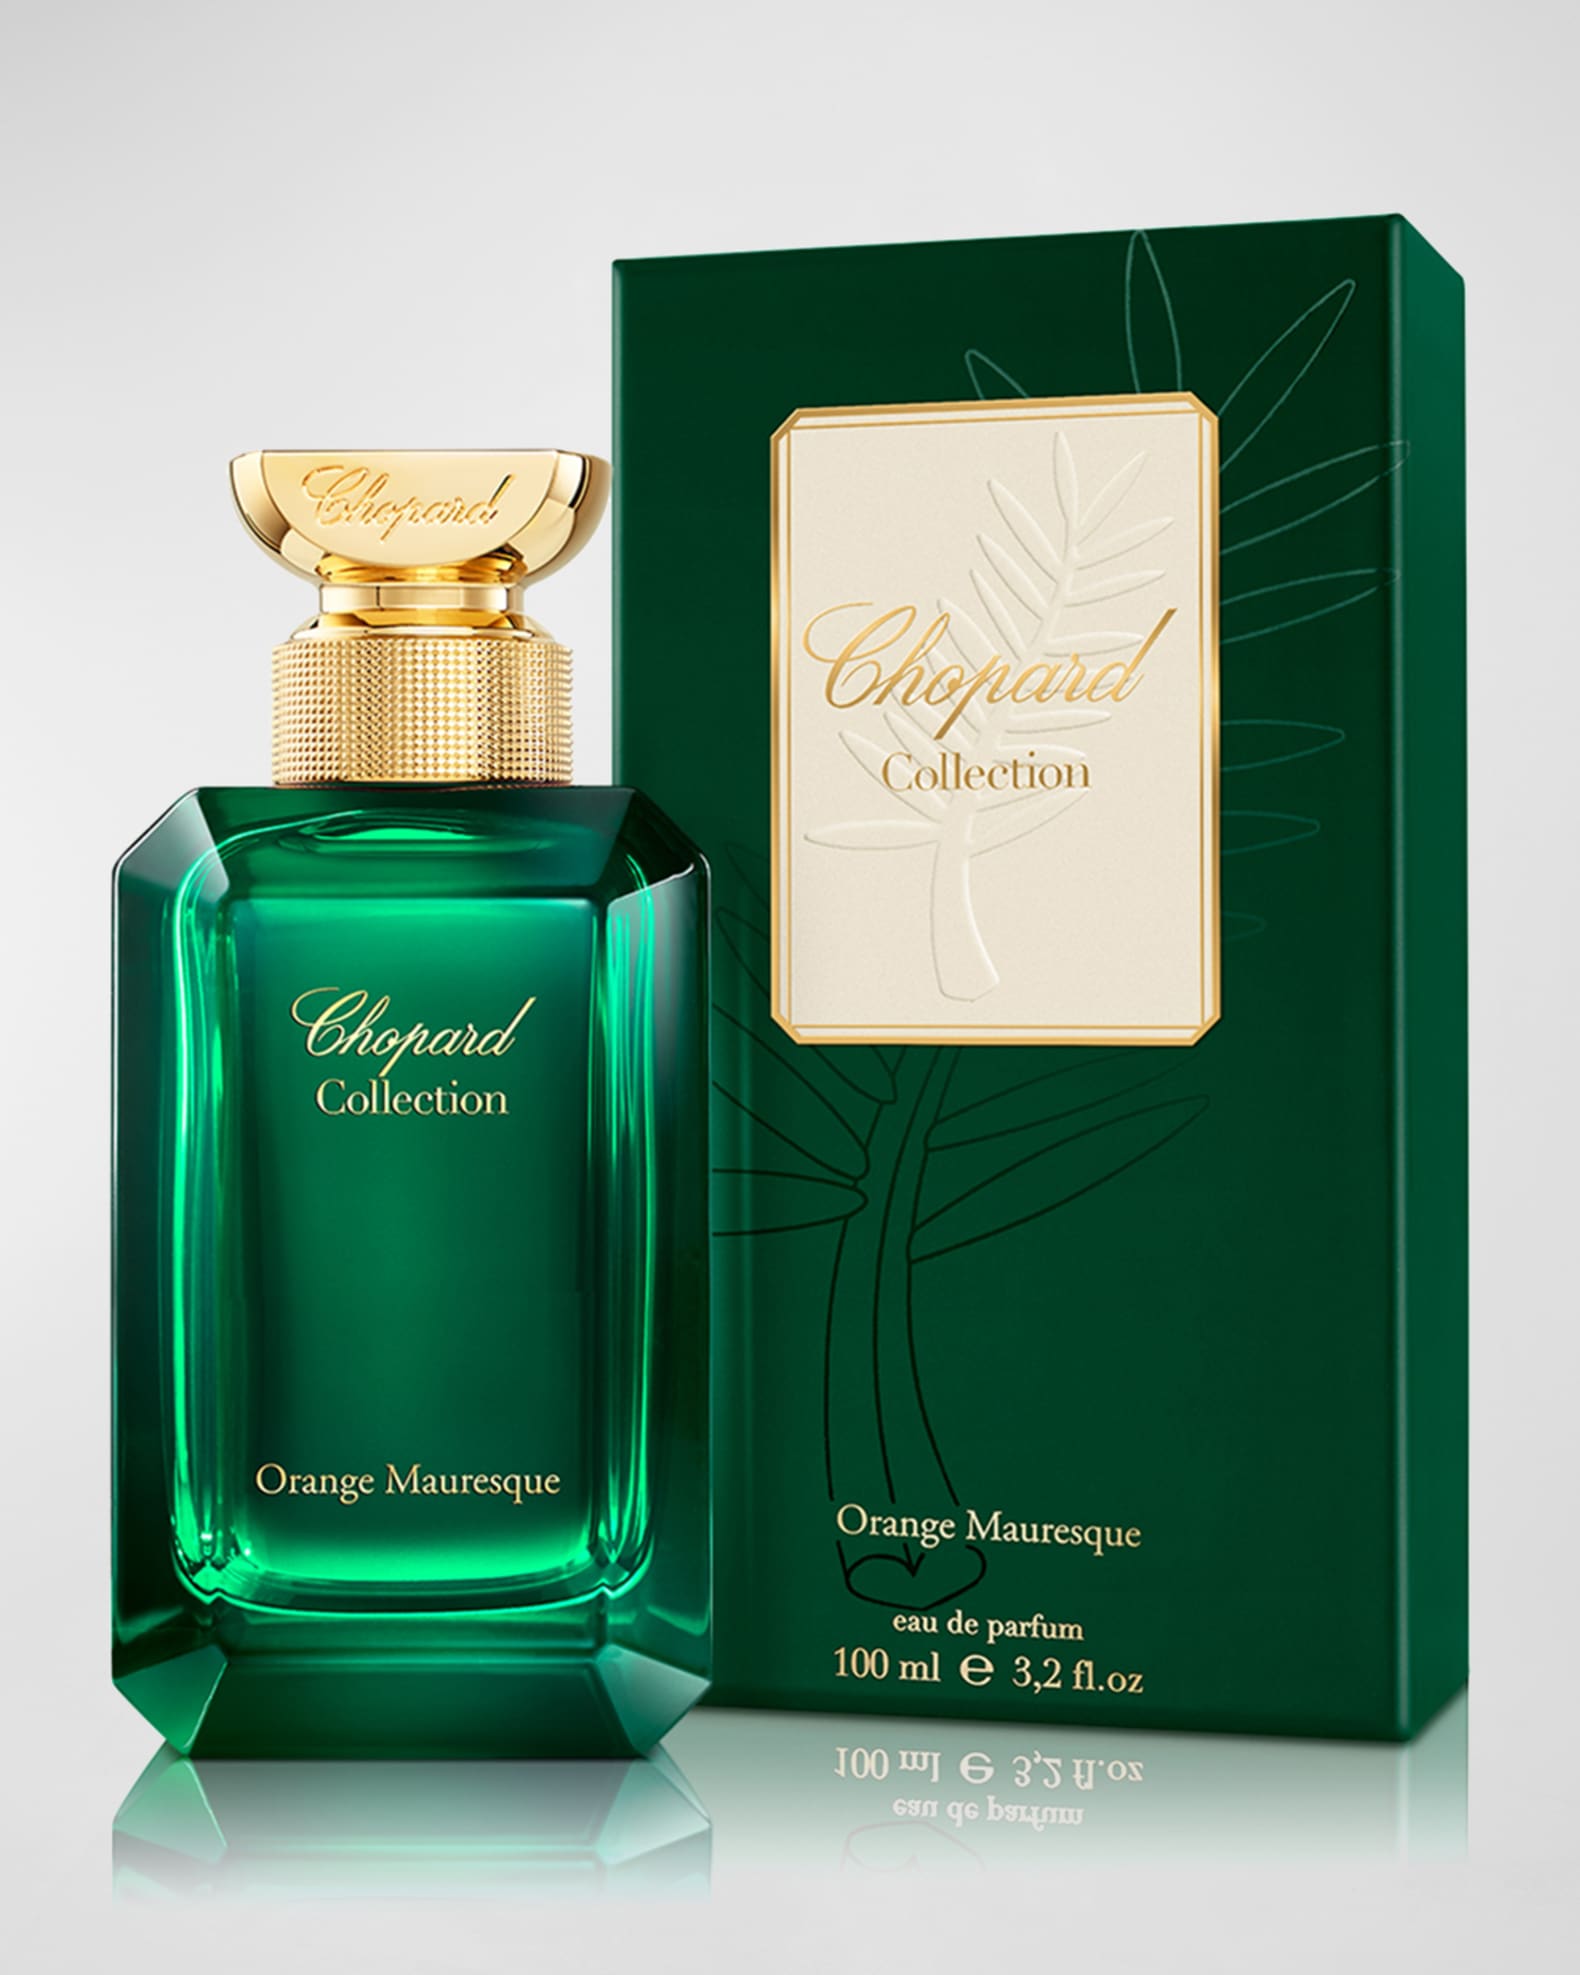 Chopard 3.2 oz. Gardens of Paradise Collection | Neiman Marcus